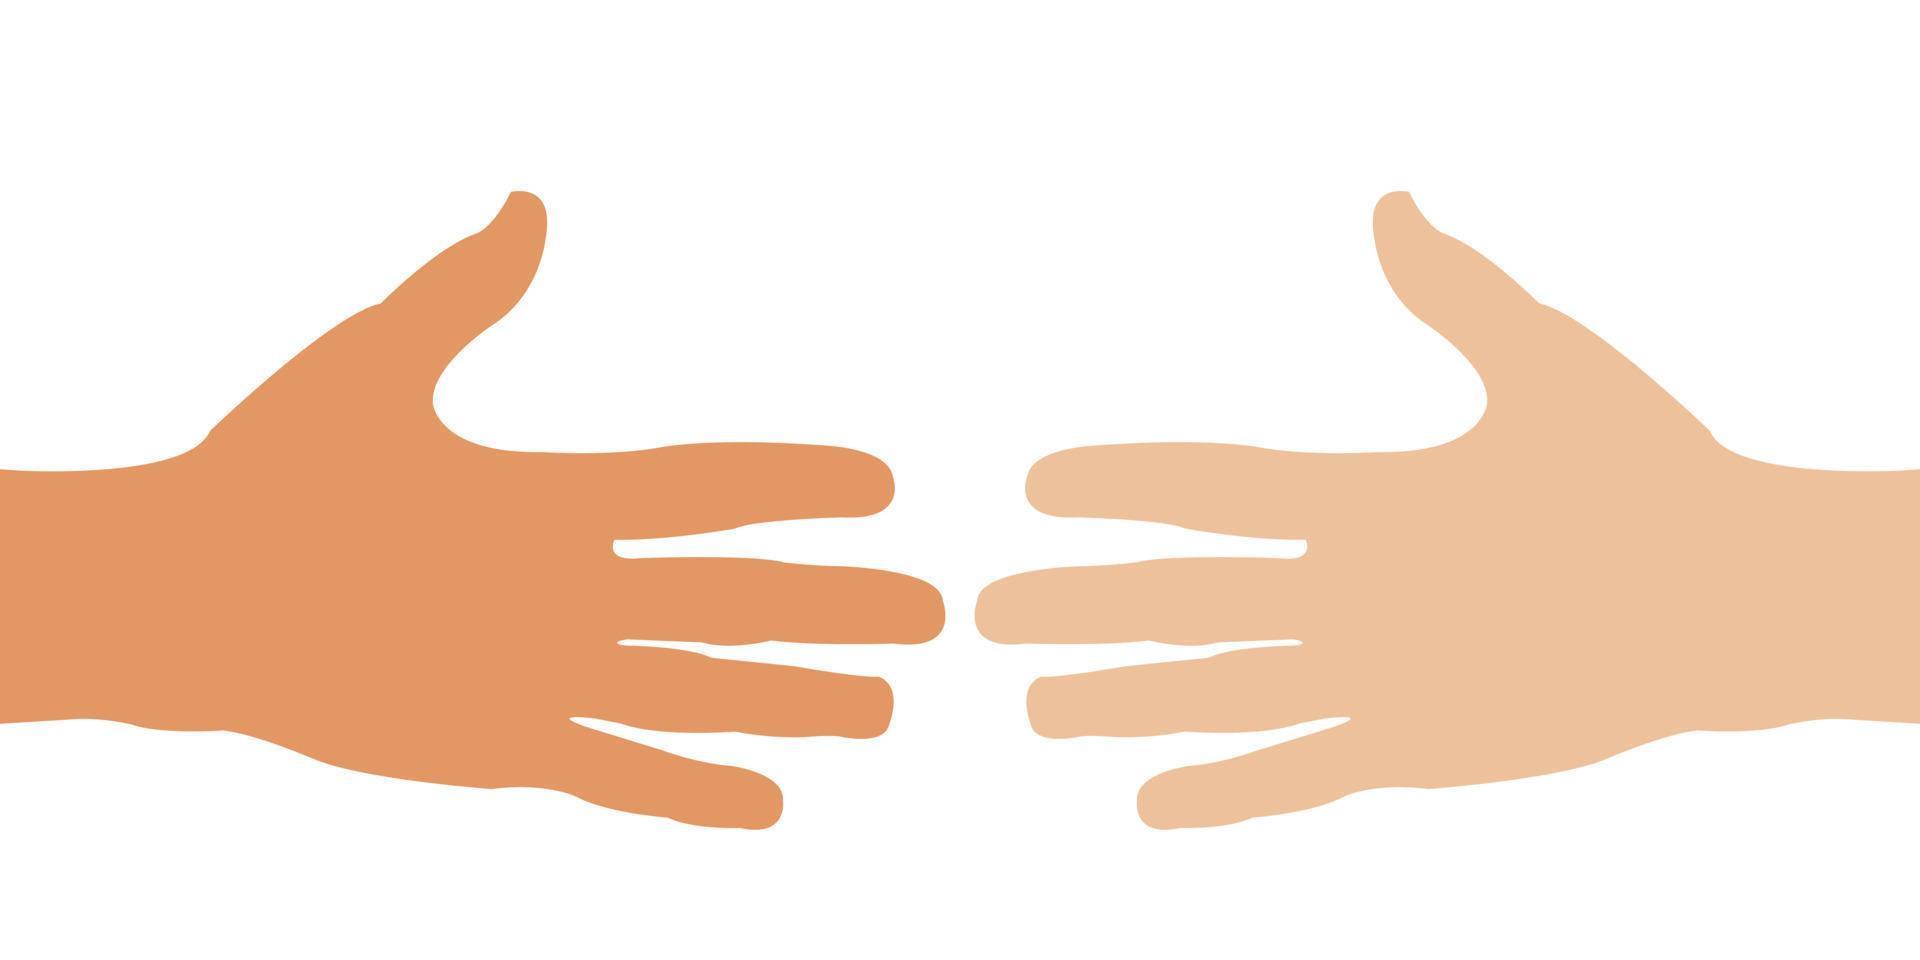 Fist bump icon The concept of power and conflict, competition, Team work, partnership, friendship, struggle. hands clenched fist punching or hitting. Two male hands Bro fist power bump gesture raised. vector